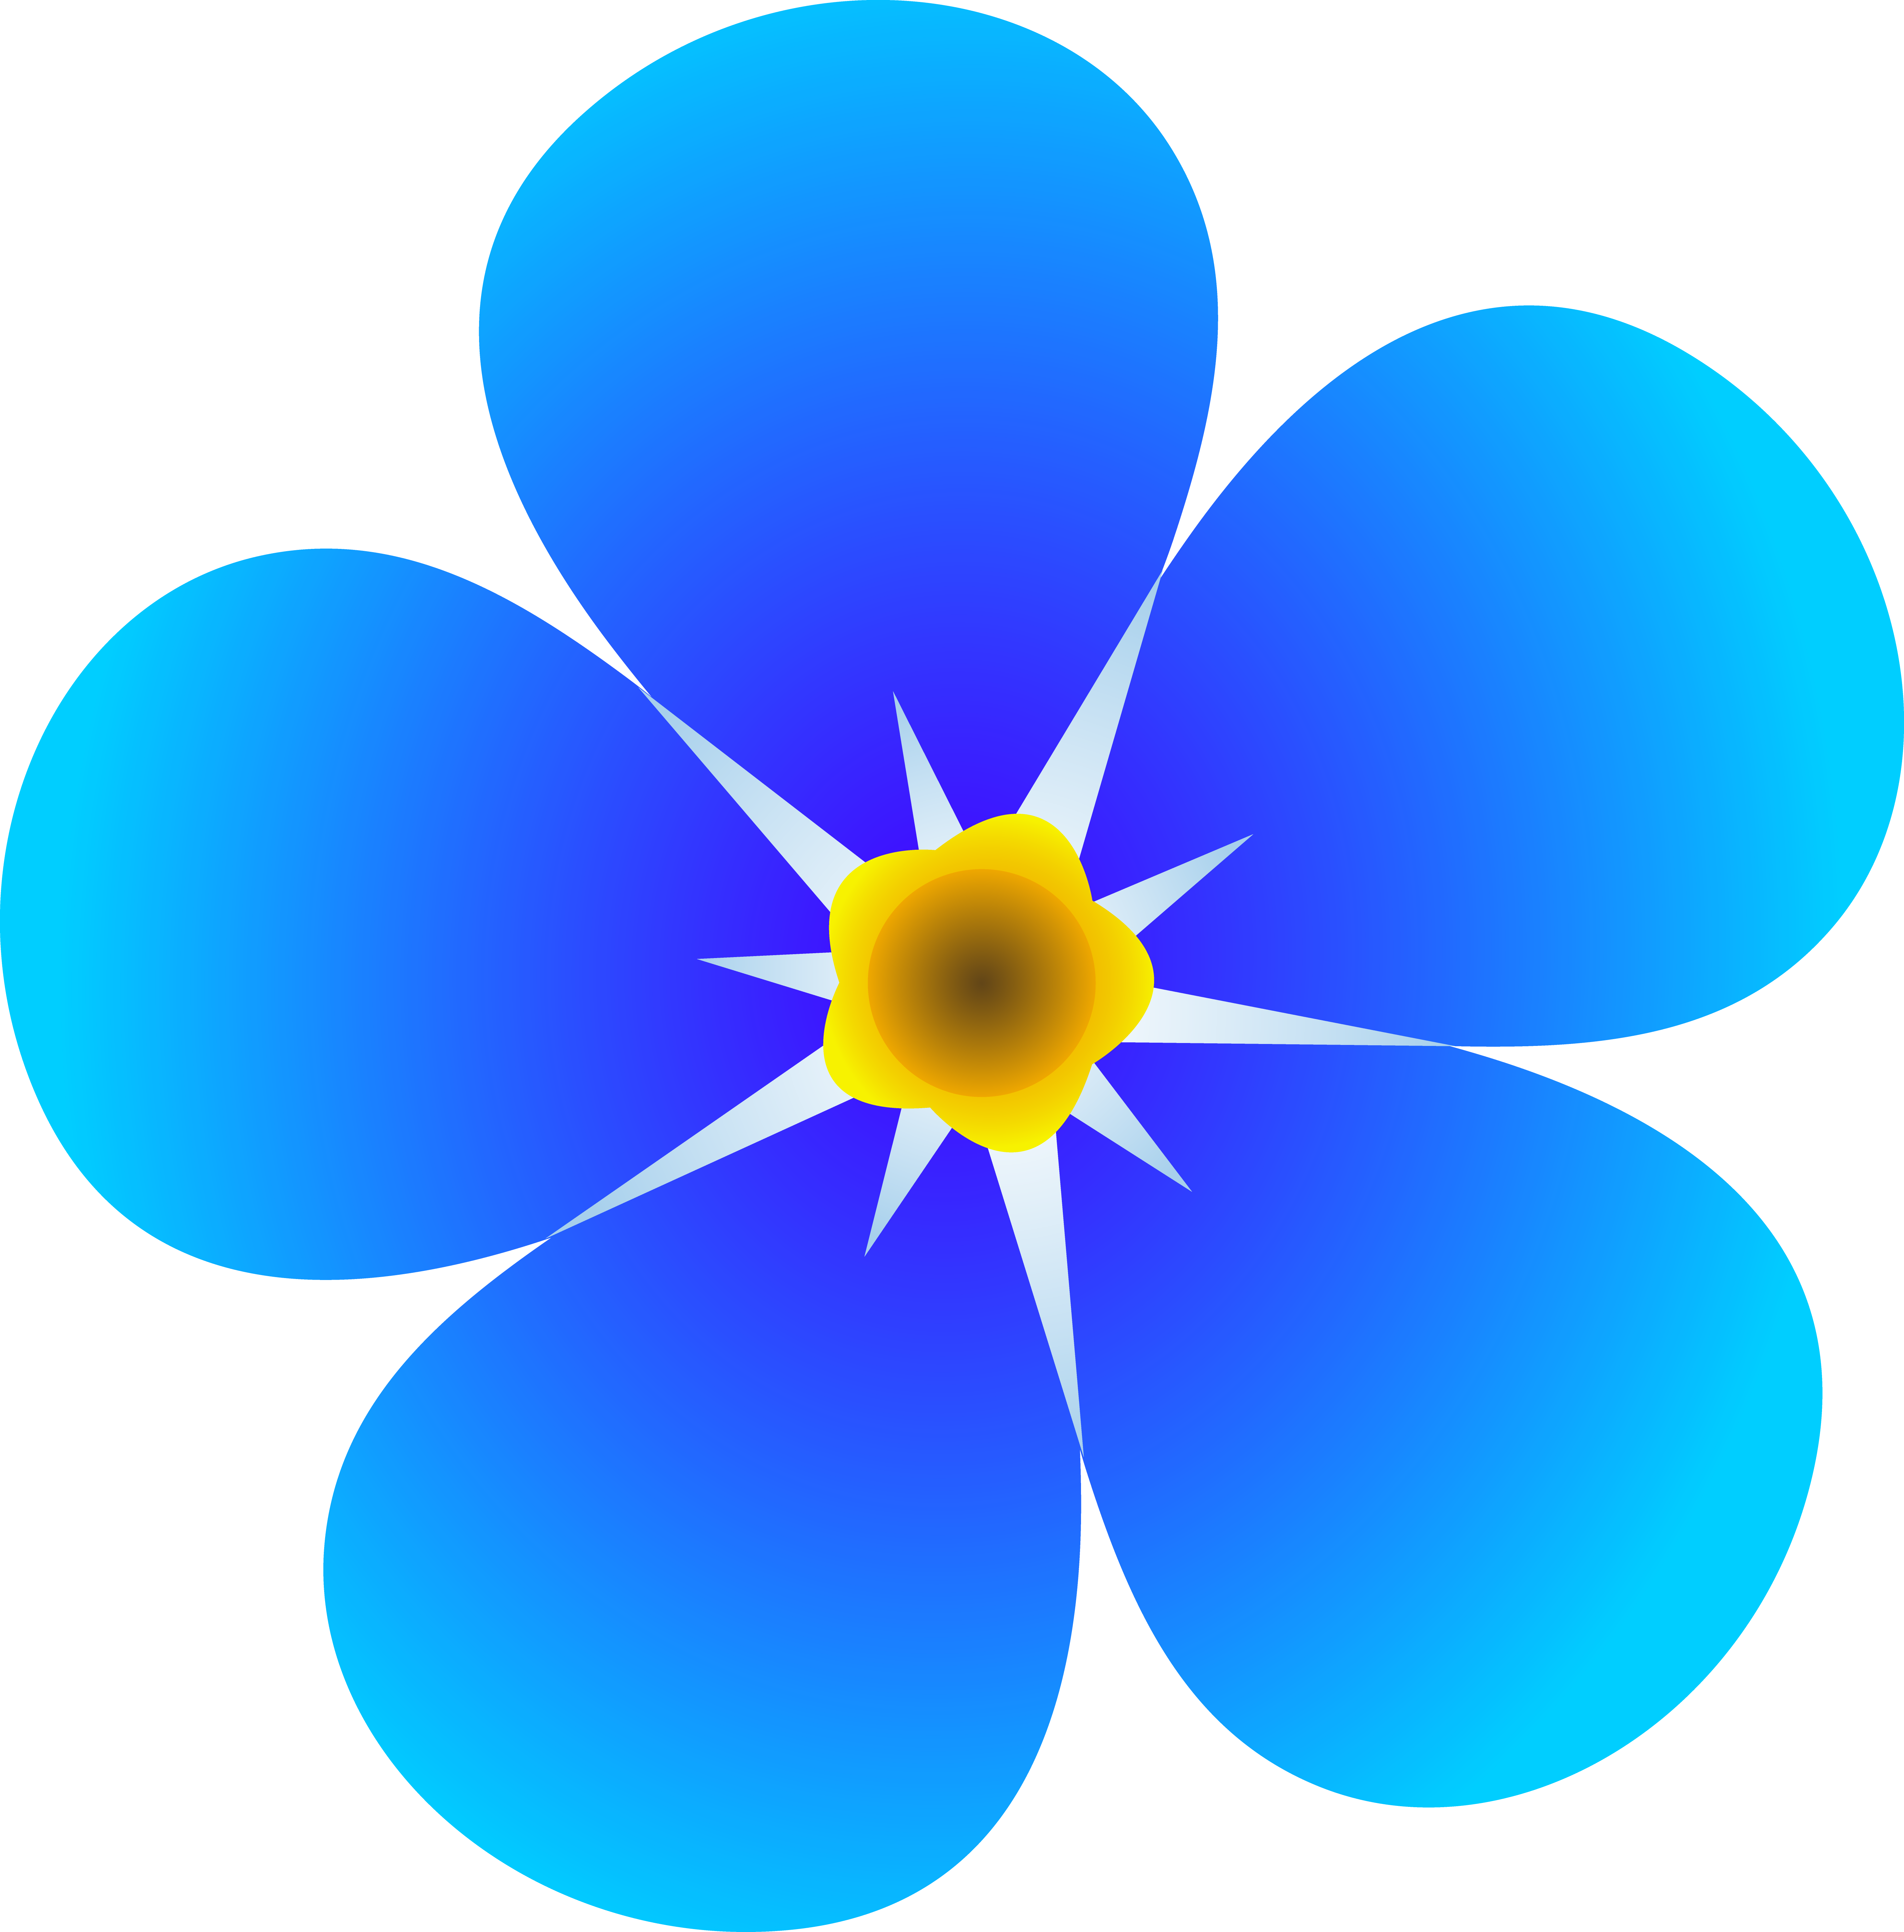 Free Blue Flower Clipart, Download Free Clip Art, Free Clip